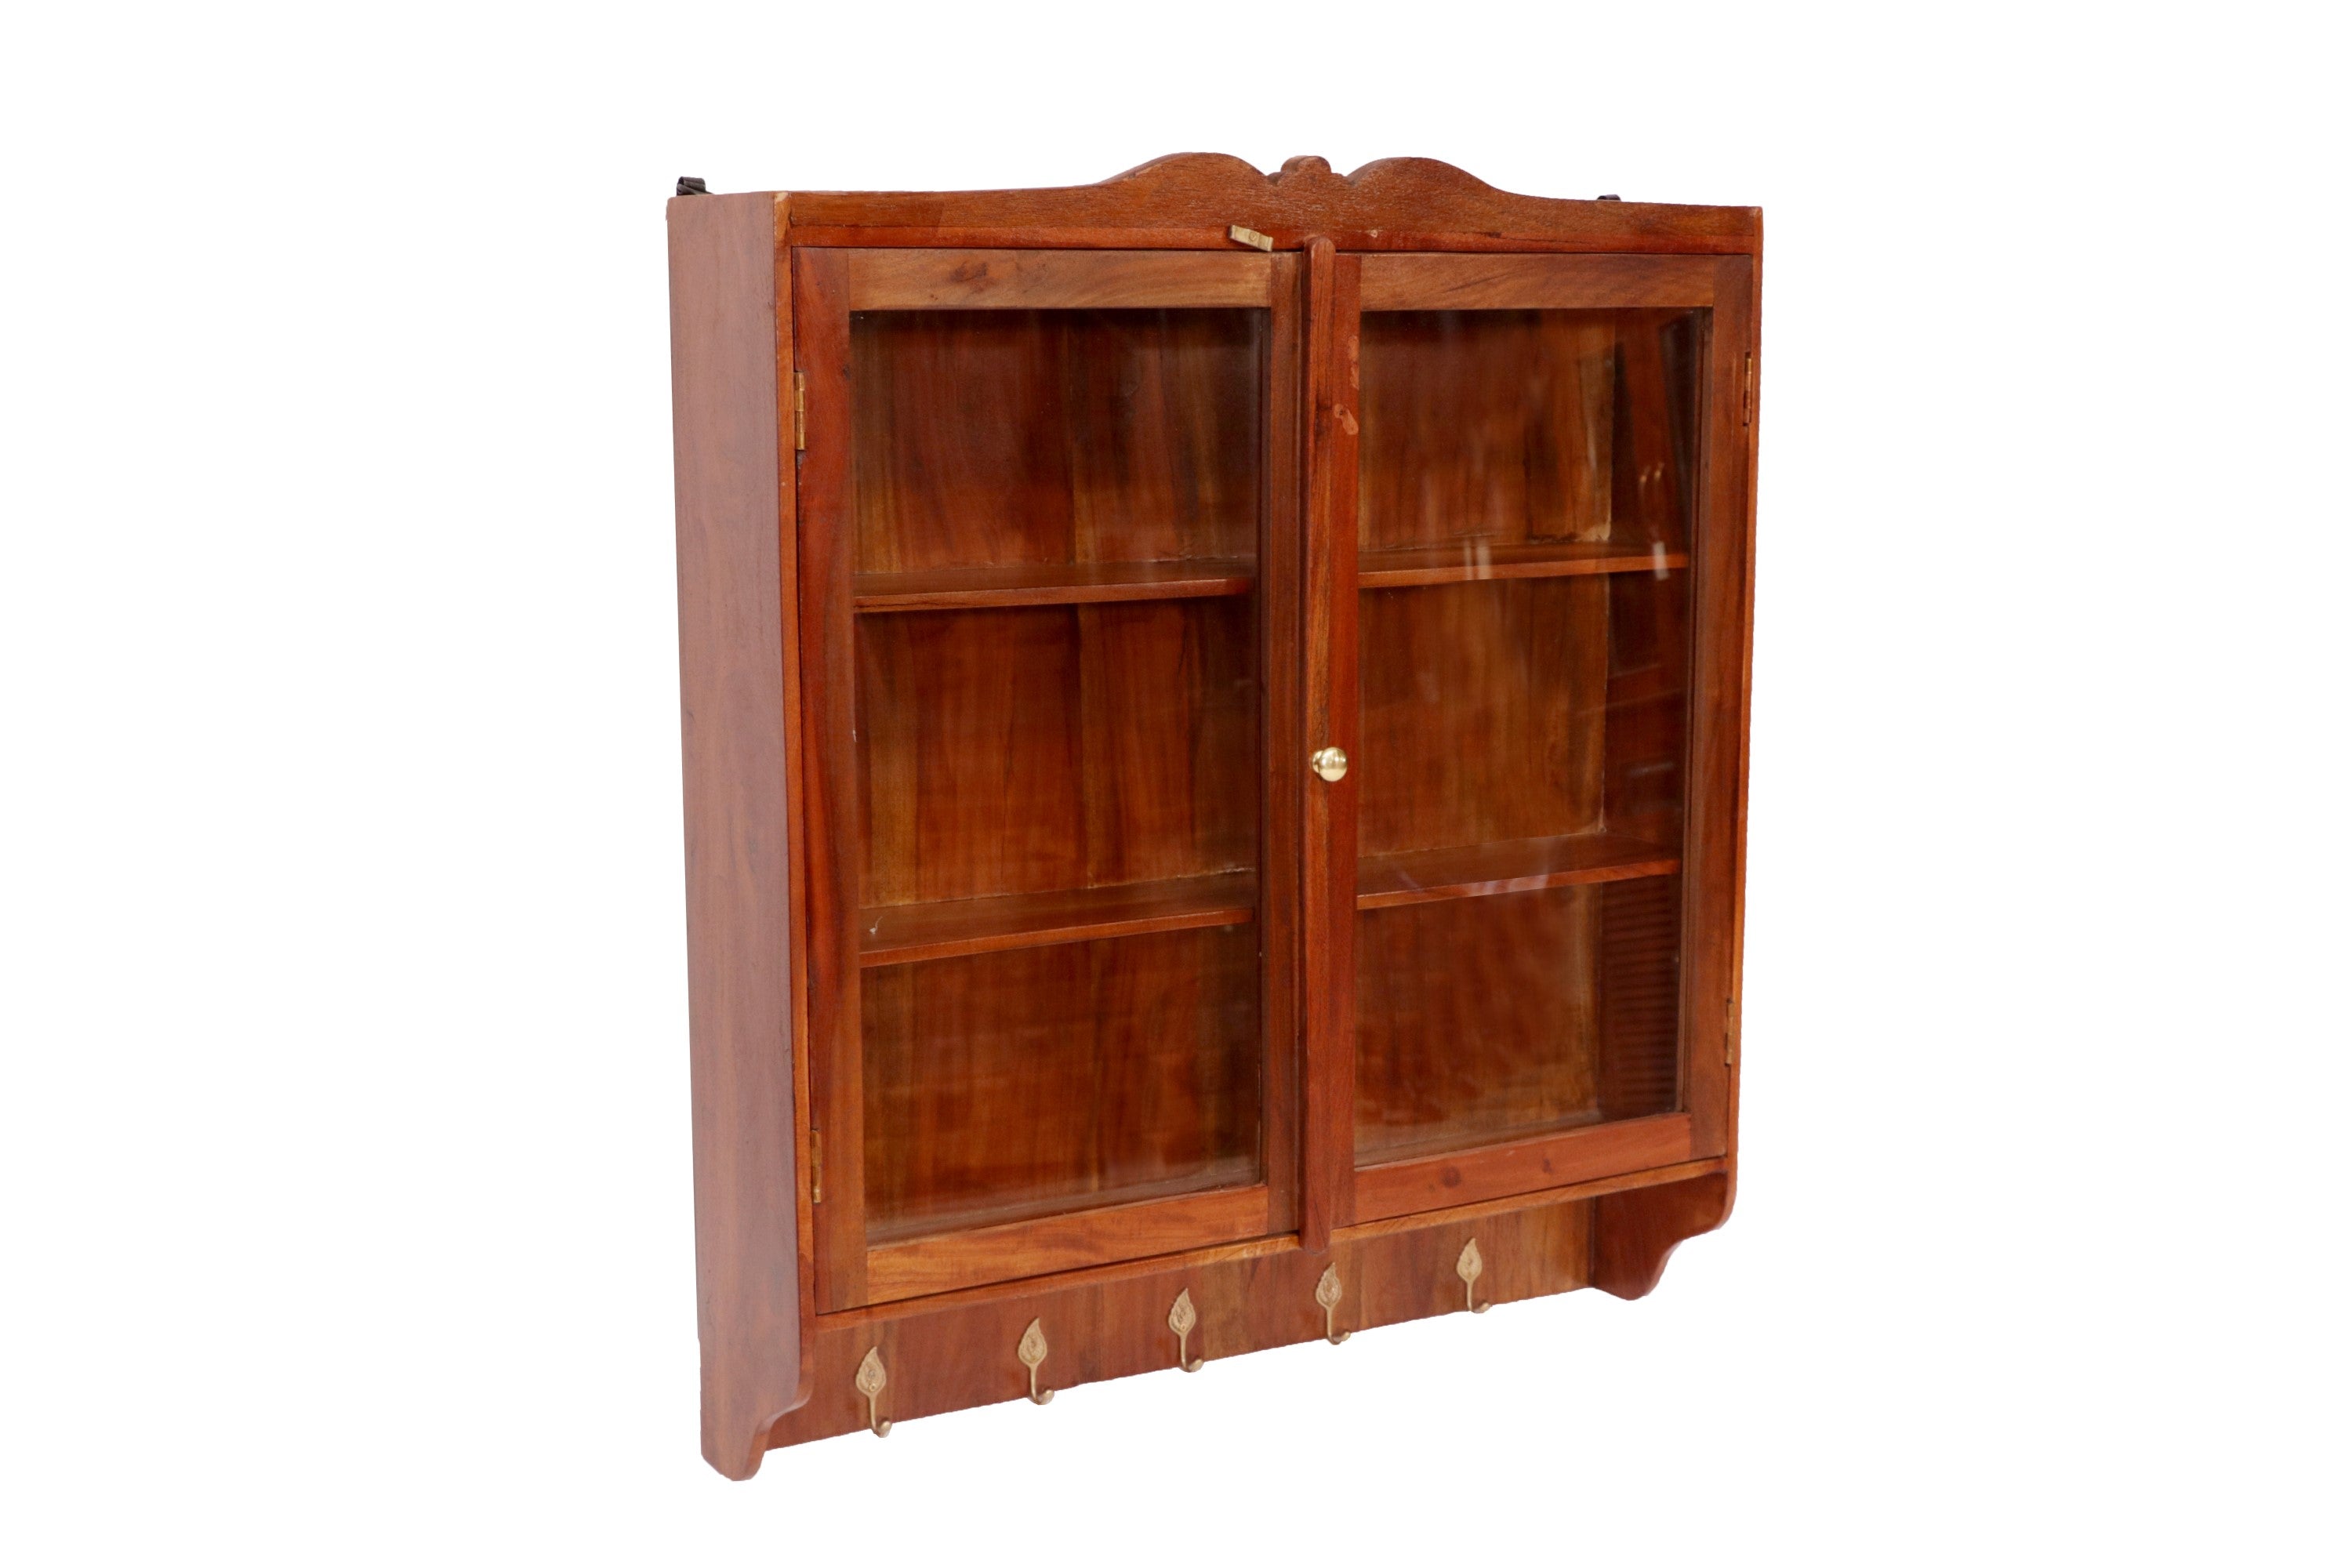 32 x 7 x 36 Inch Long-Wide Hanging Wooden Cabinet Wall Cabinet